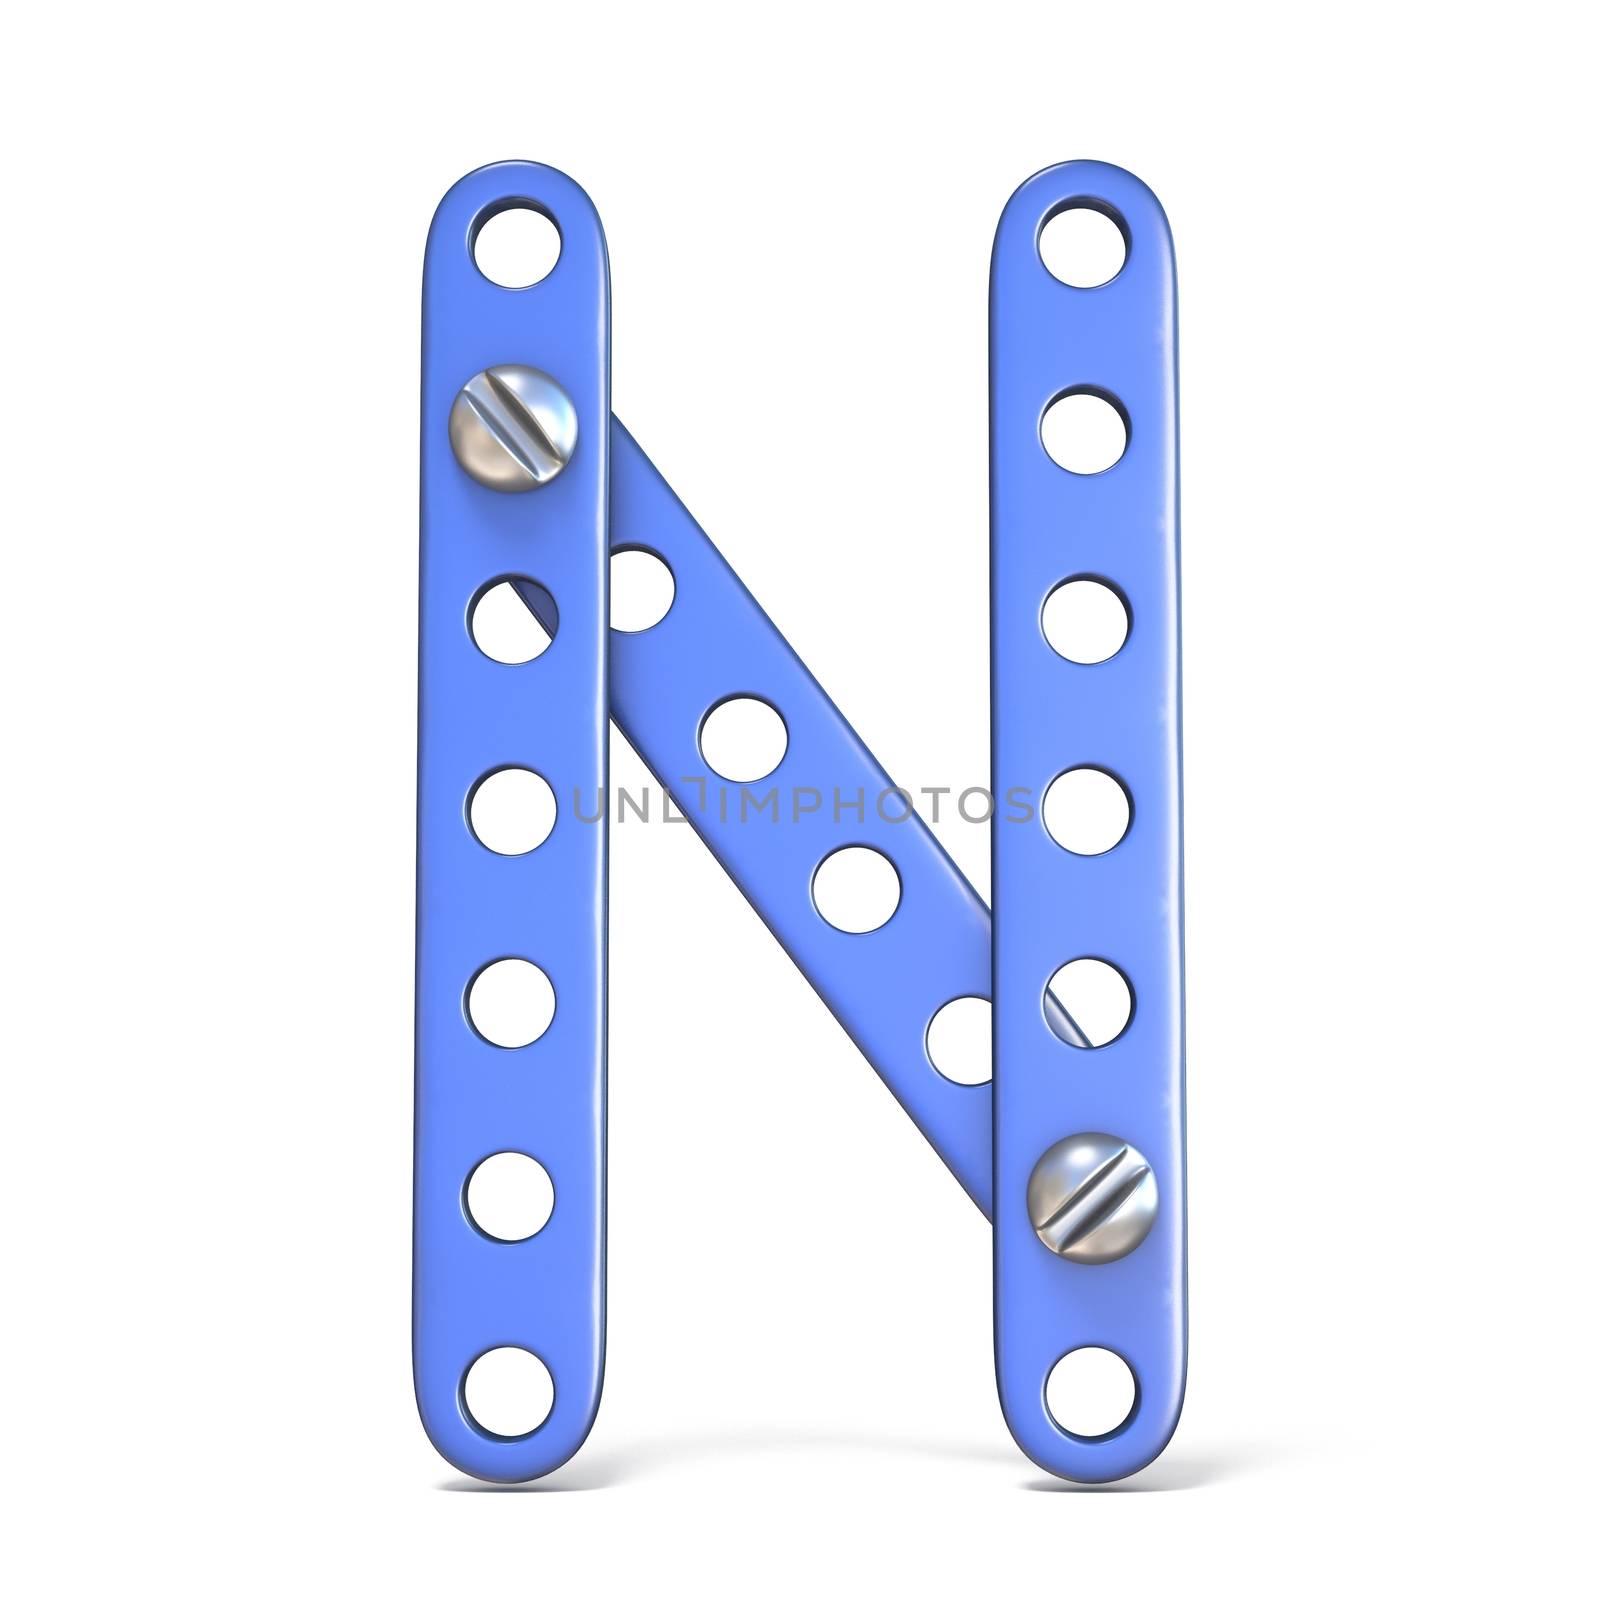 Alphabet made of blue metal constructor toy Letter N 3D by djmilic